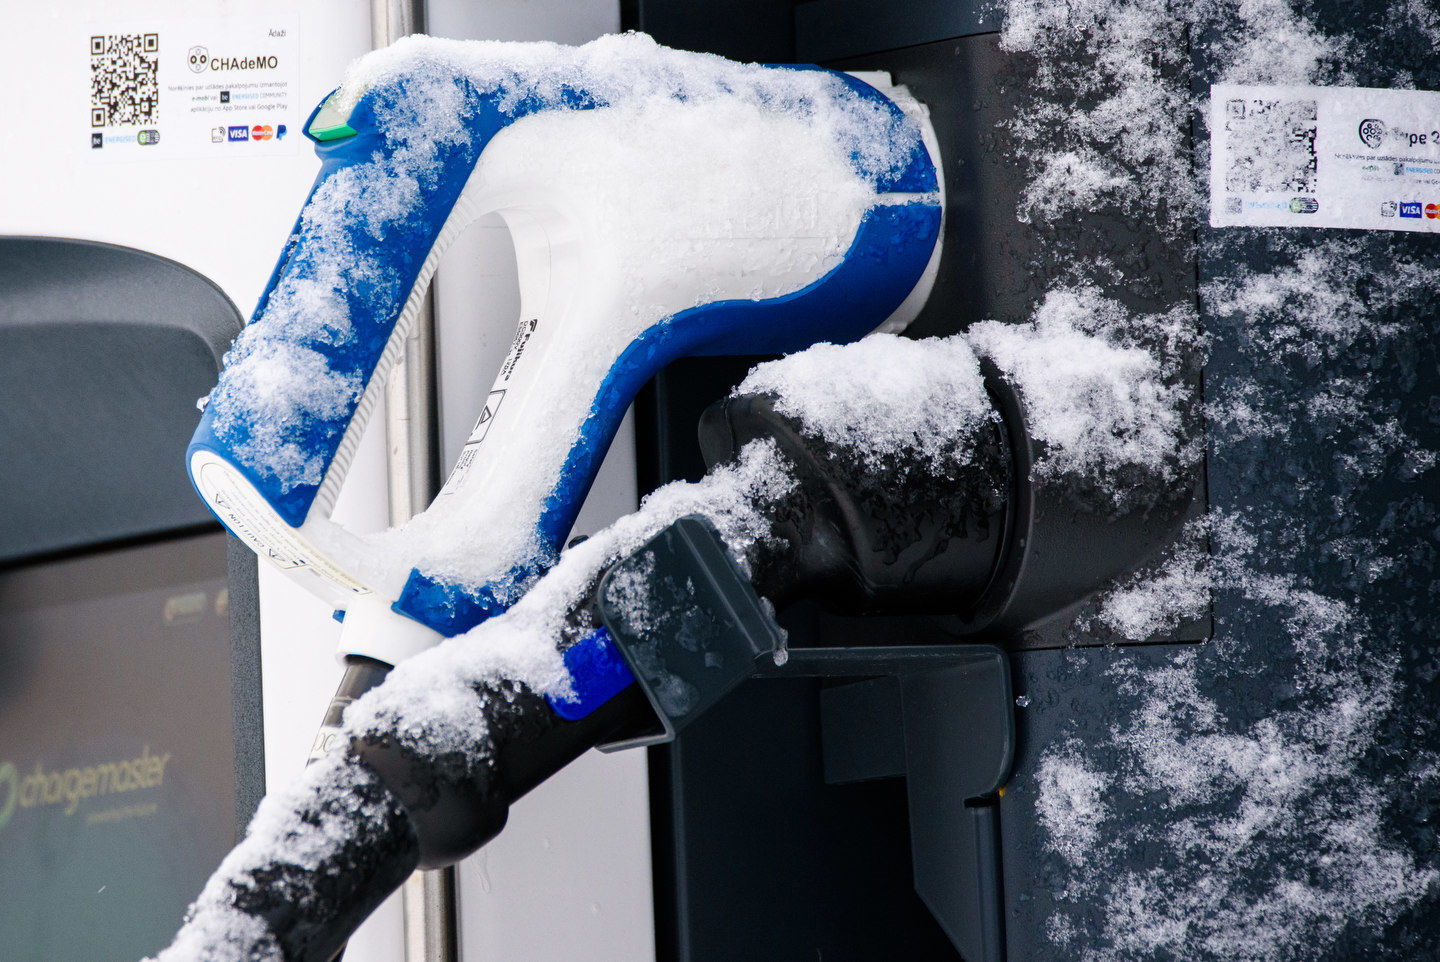 We answer your questions about electric vehicles and winter